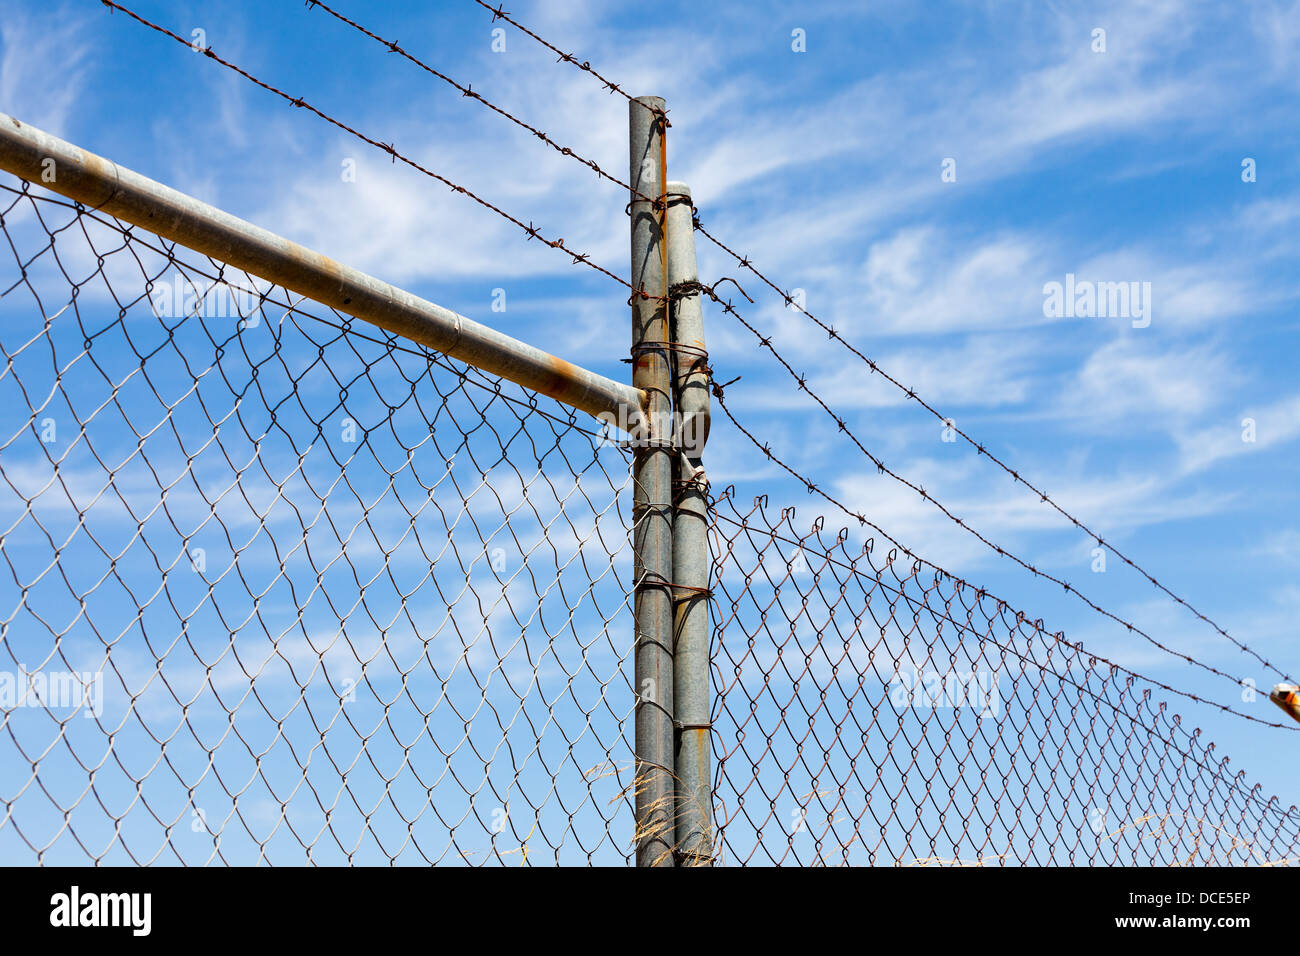 Mesh fence with barbed wire on a background of blue sky Stock Photo